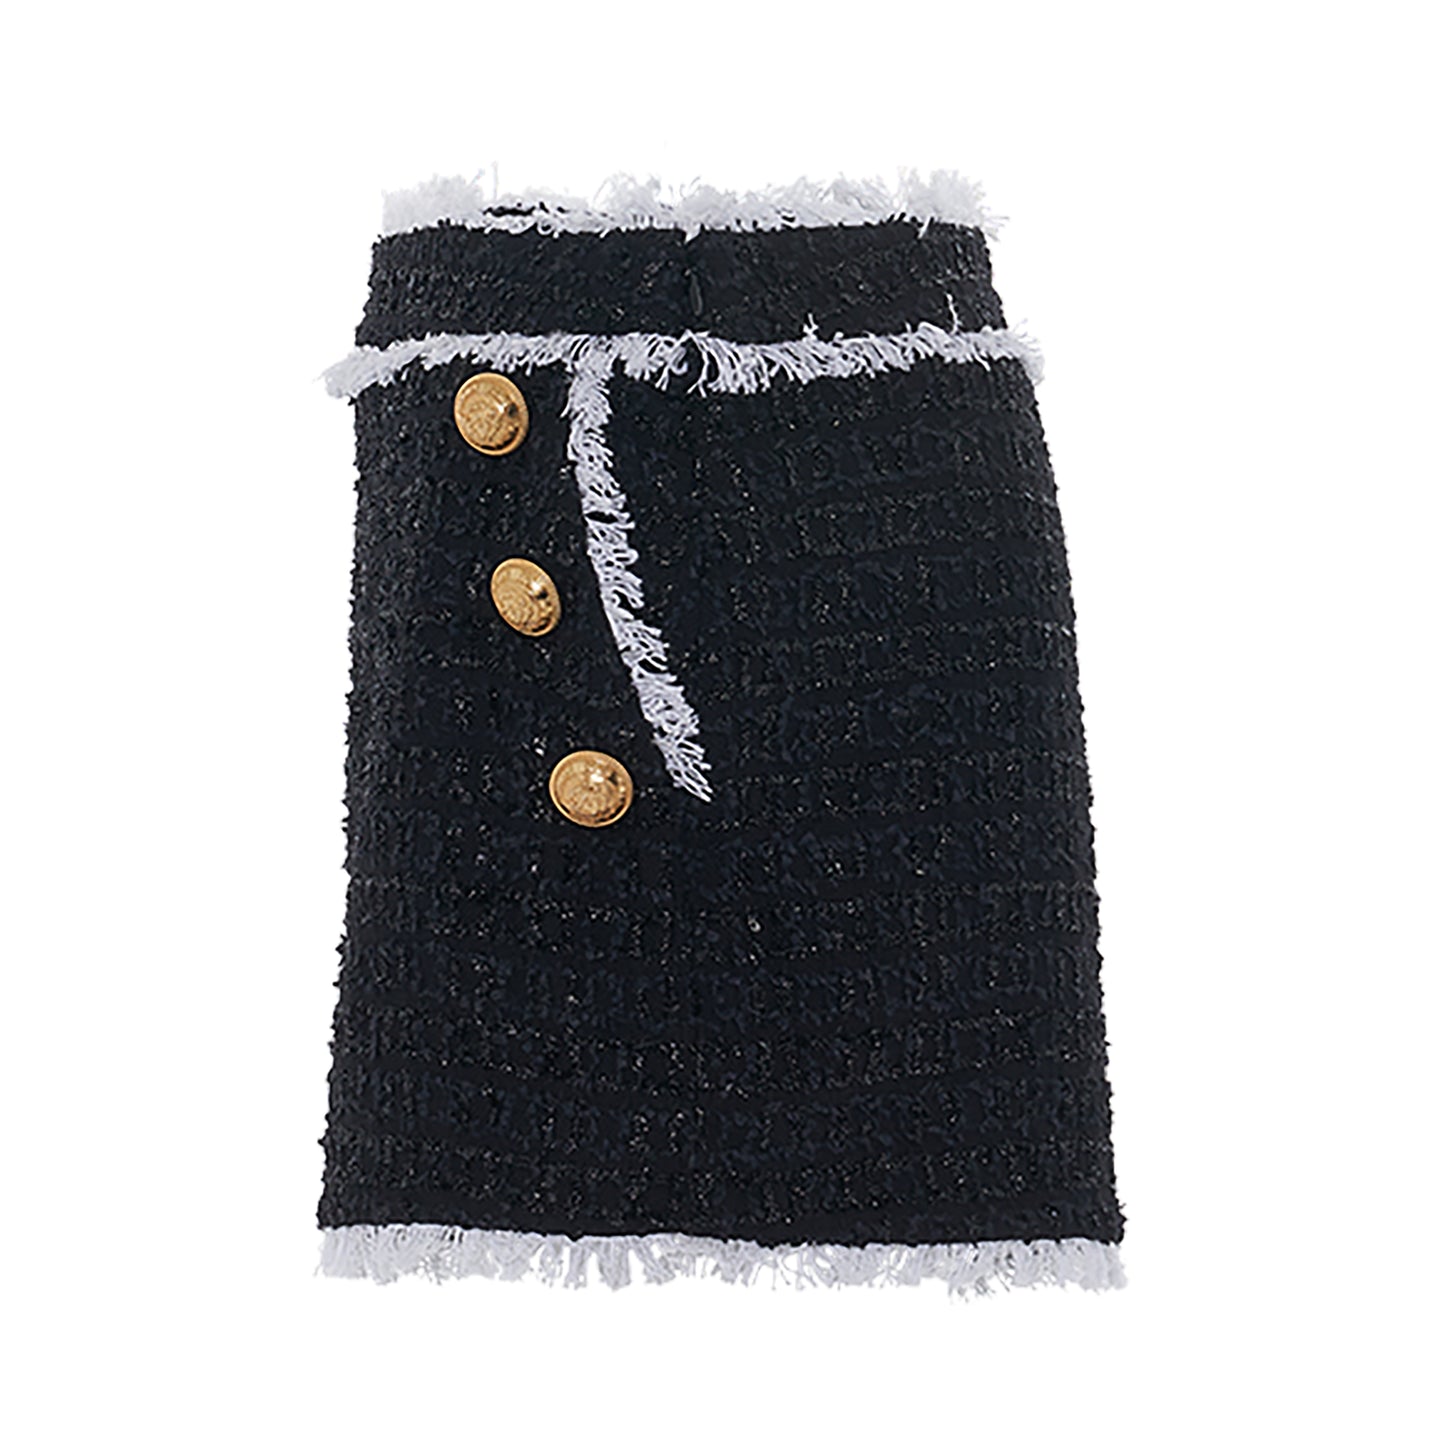 6 Button Tweed Shorts in Black/White